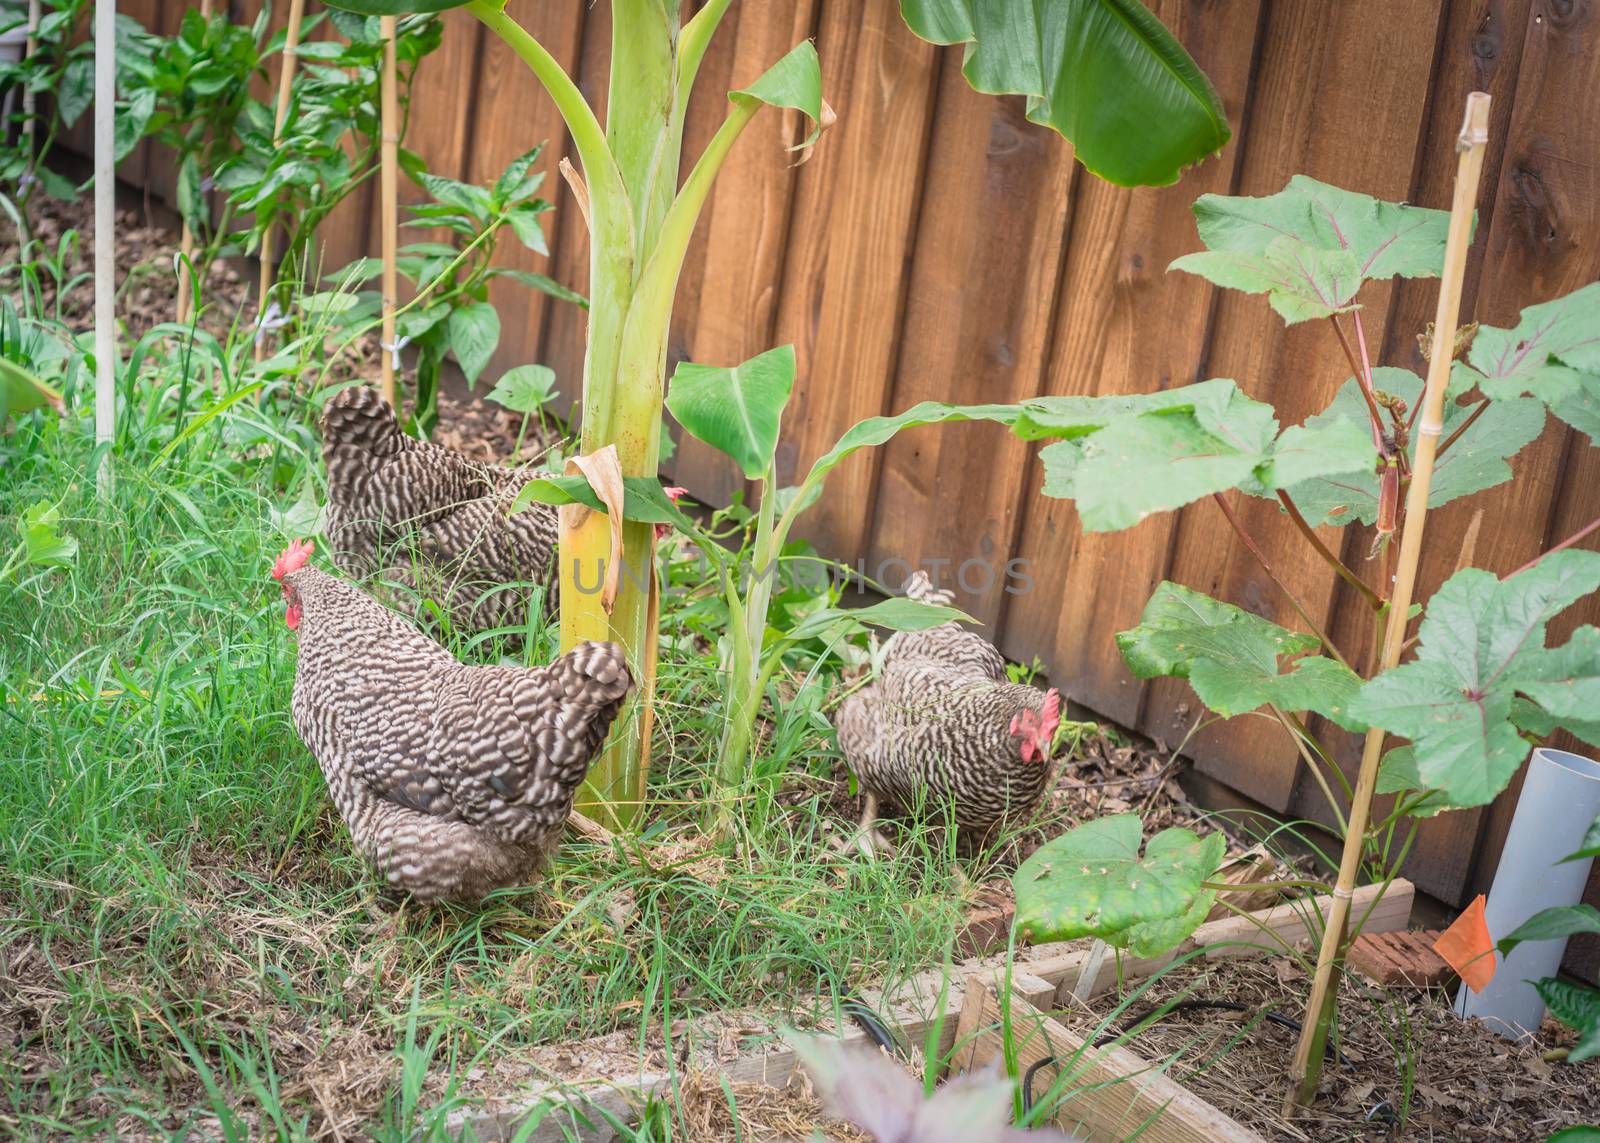 Three free range chickens at backyard garden near Dallas, Texas, America. Marans breed barred feathering laying hen chick pecking in natural settings at vegetable allotment